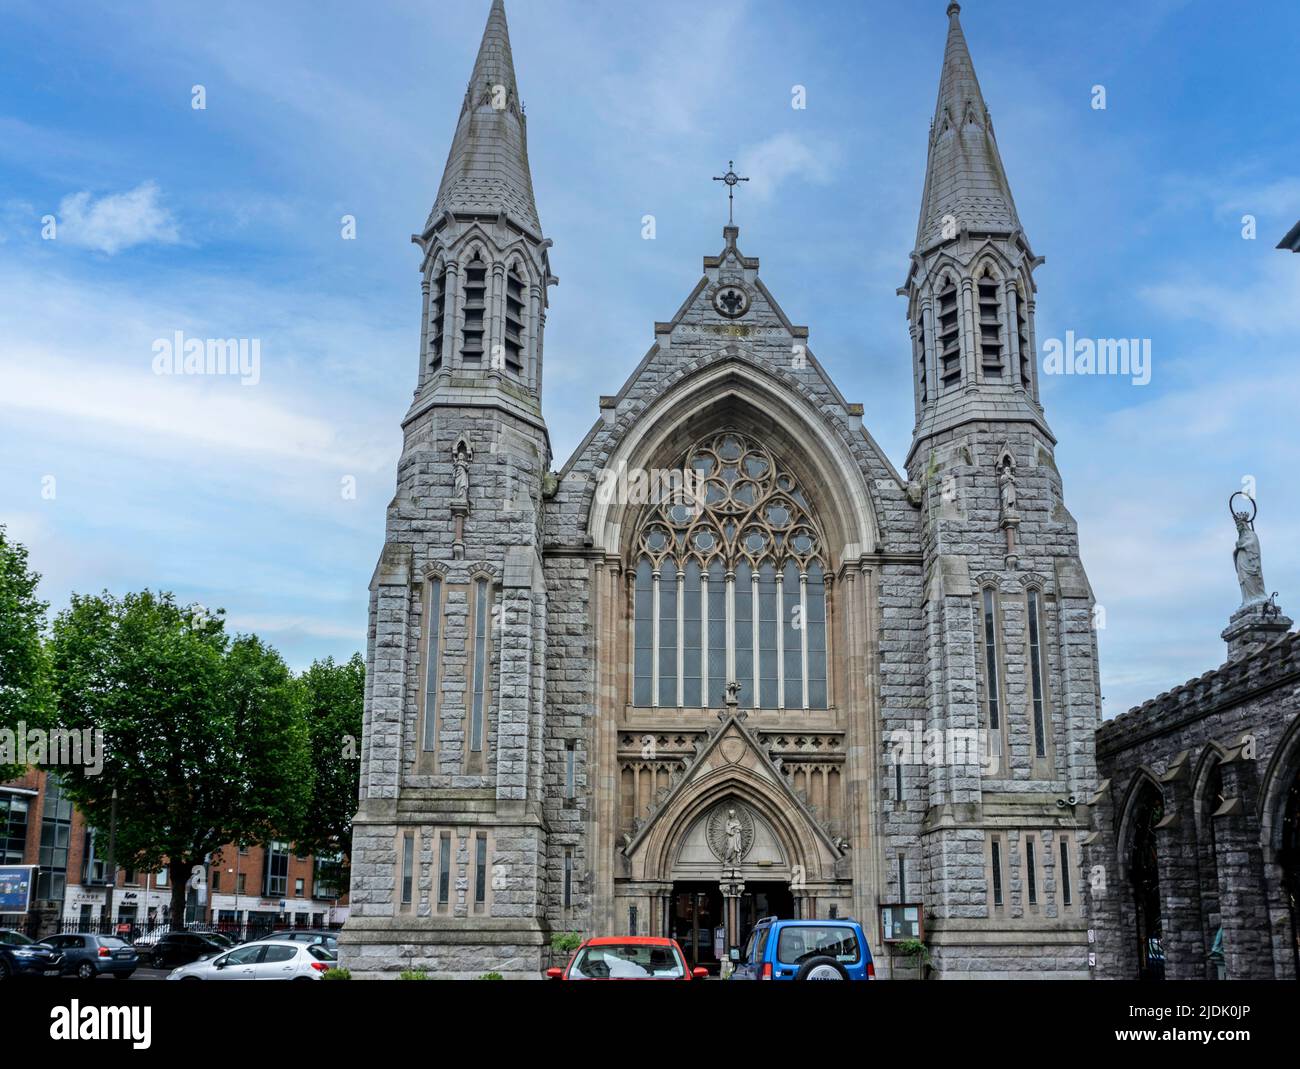 The  Mary Immaculate, Roman Catholic, Church in Tyrconnell Road, Inchicore, Dublin, Ireland. Opened in 1878. Run by the Oblate Fathers. Stock Photo